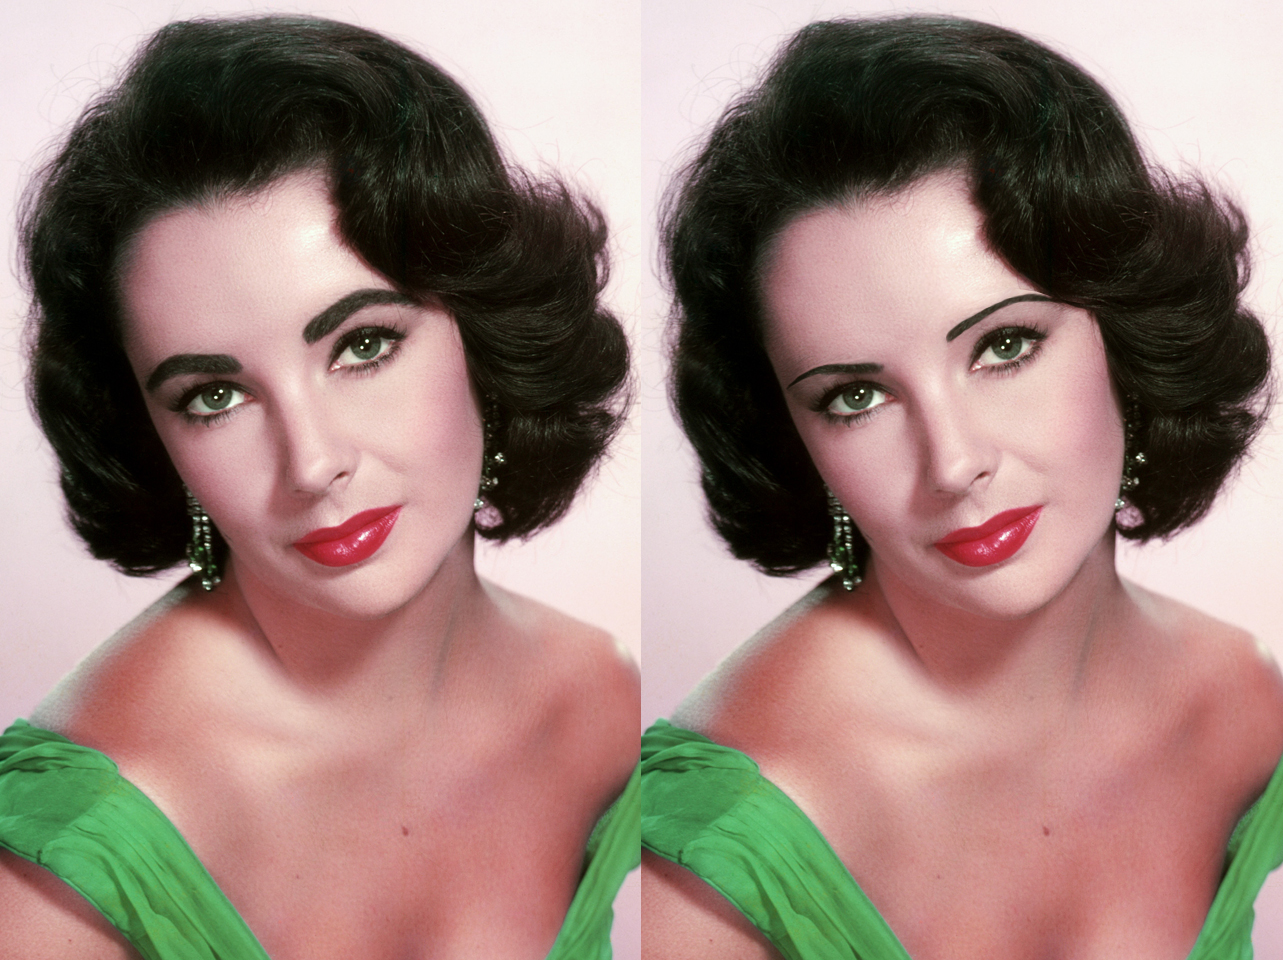 Elizabeth Taylor's signature brows from the 1950s vs digitally edited thin-brow look | Source: Getty Images